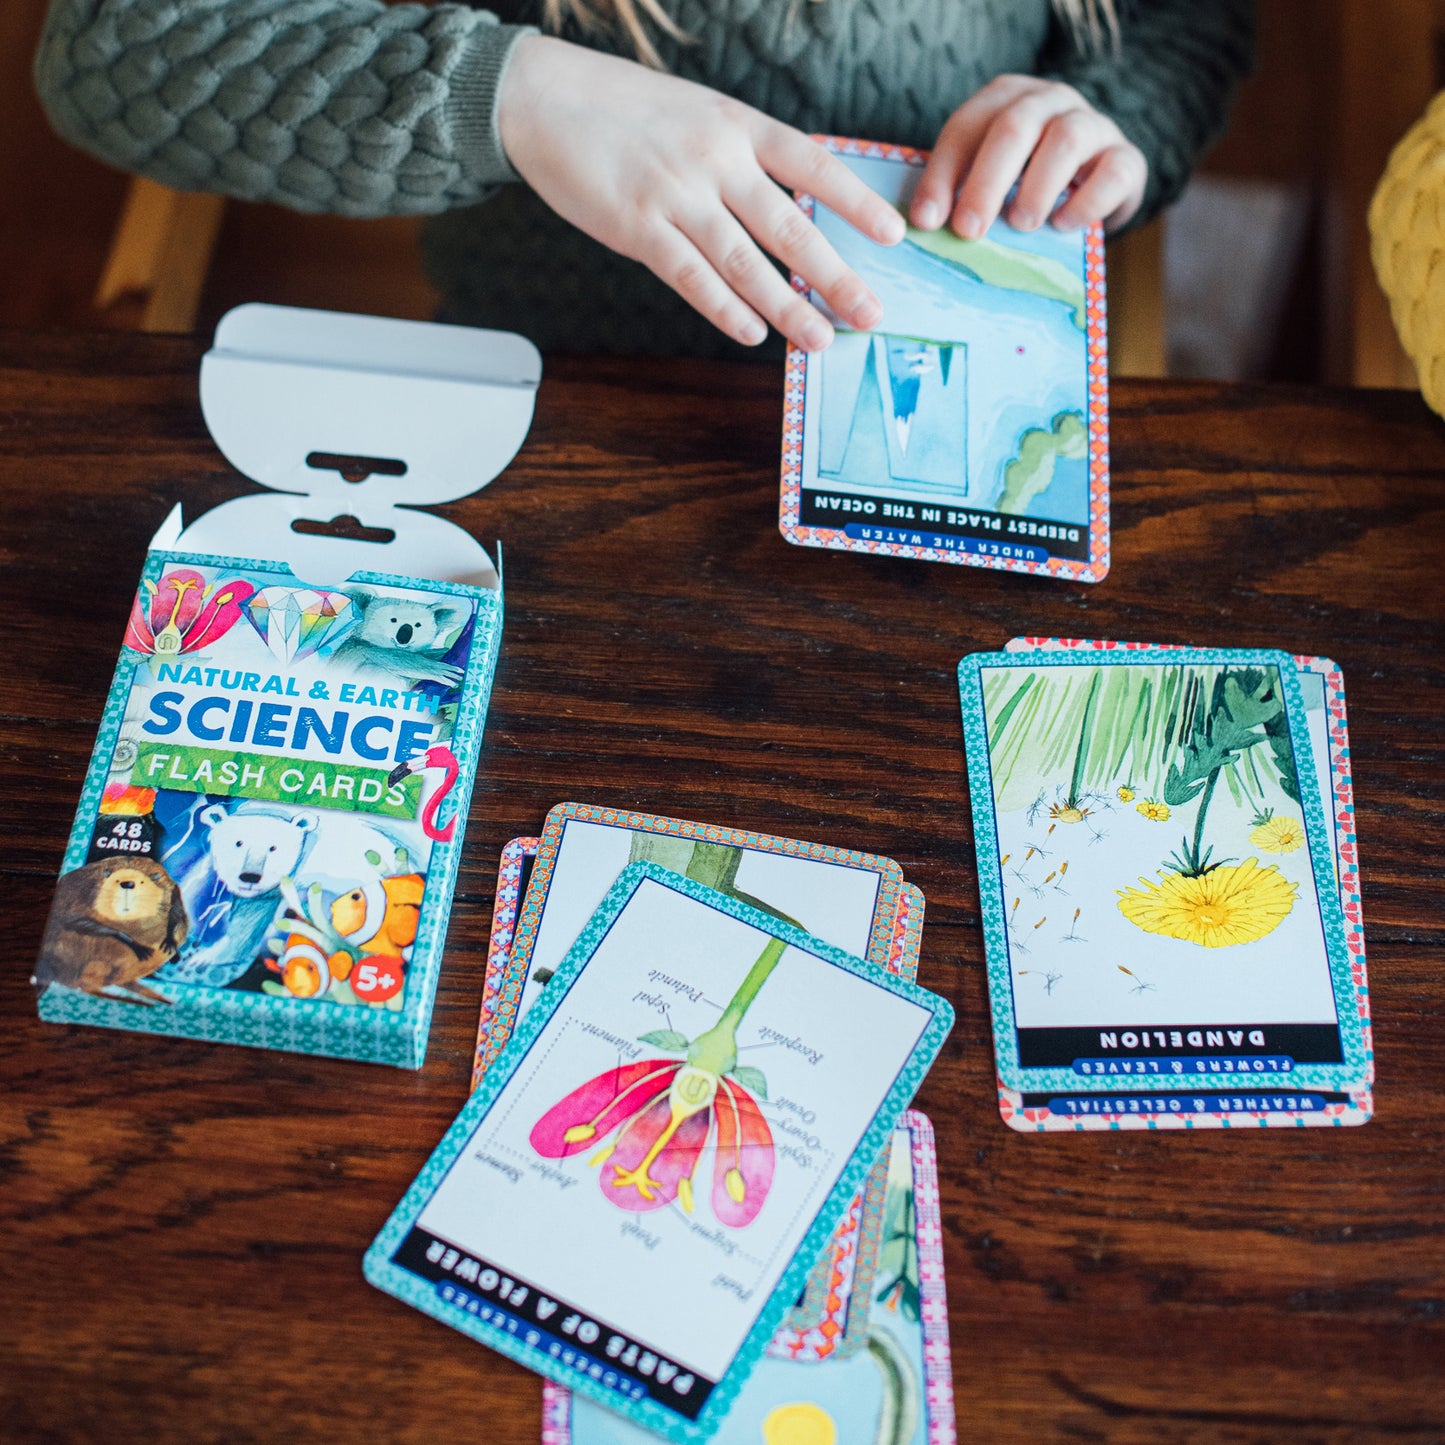 Natural and Earth Science Educational Flash Cards by eeBoo for Kids 5+